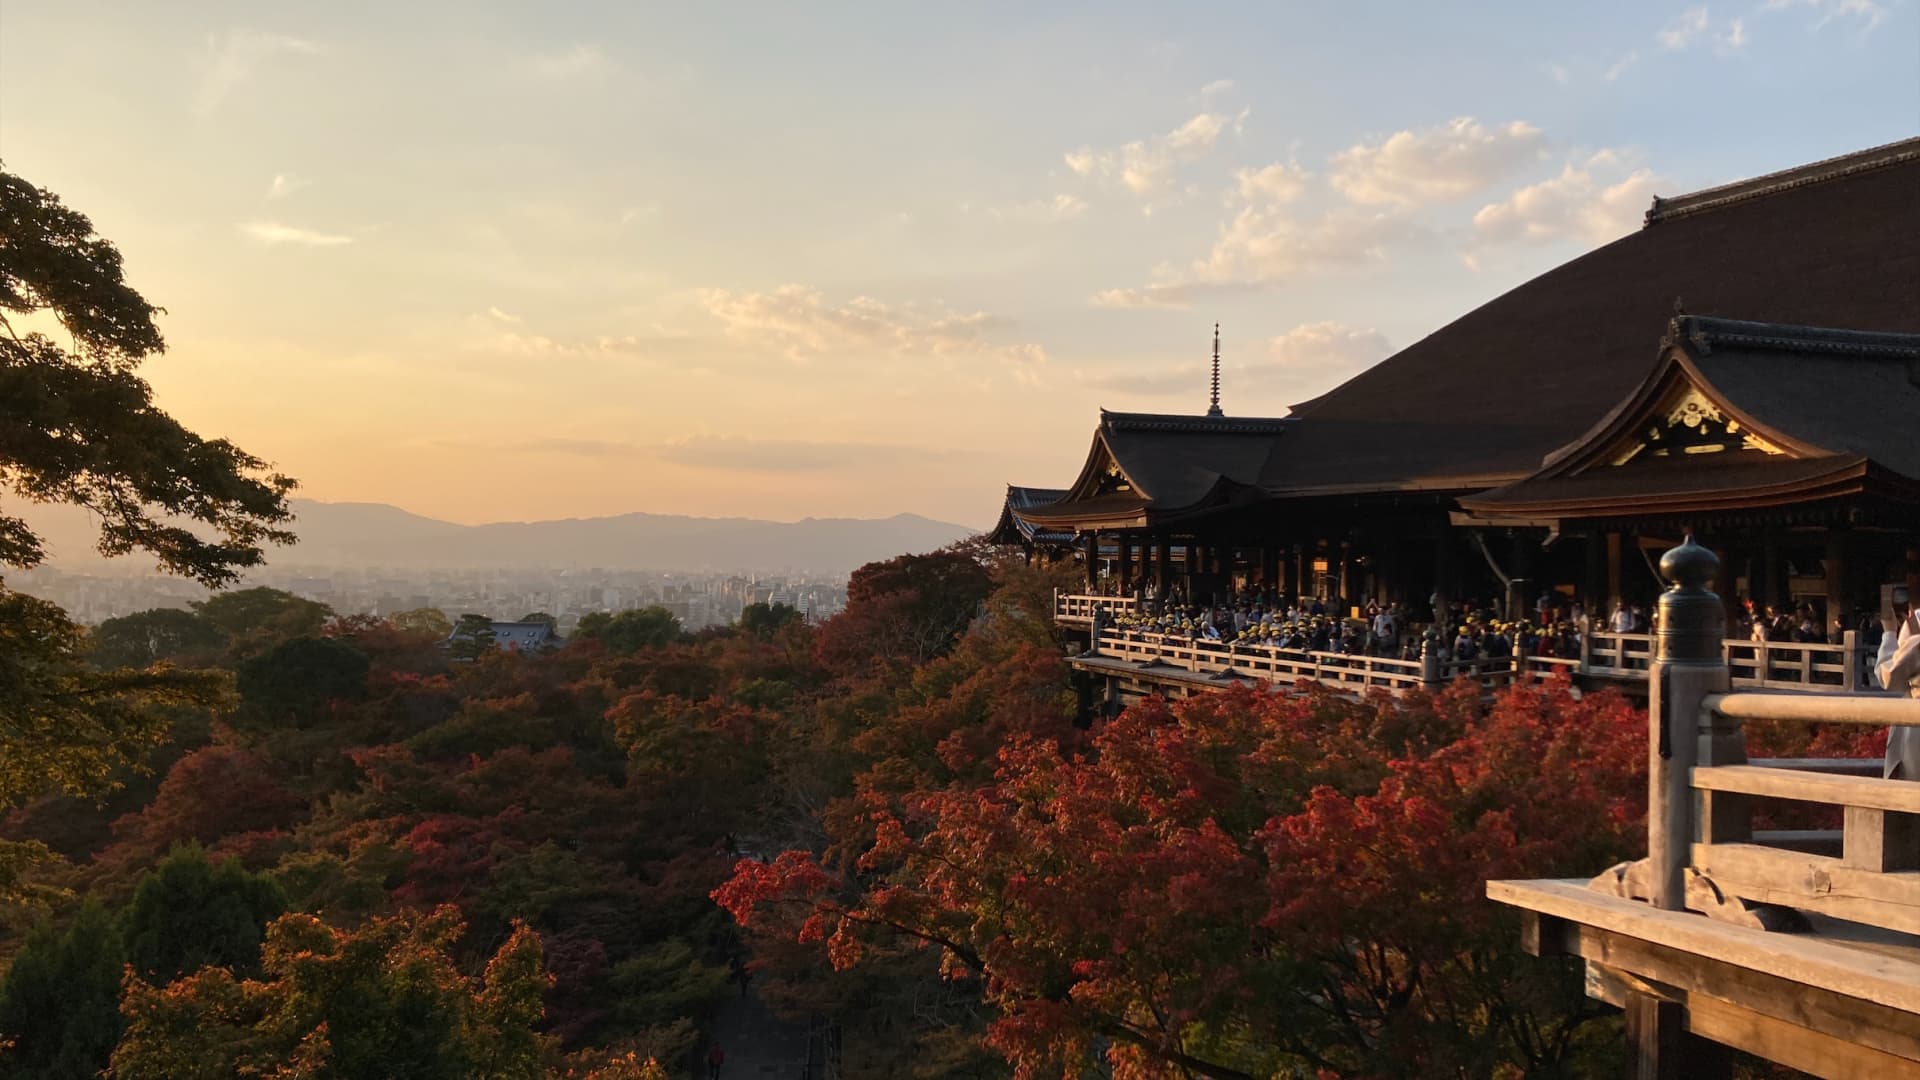 Visitors gather on a terrace near the Kiyomizu-dera to watch the sunset and autumn leaves in Kyoto, Japan.